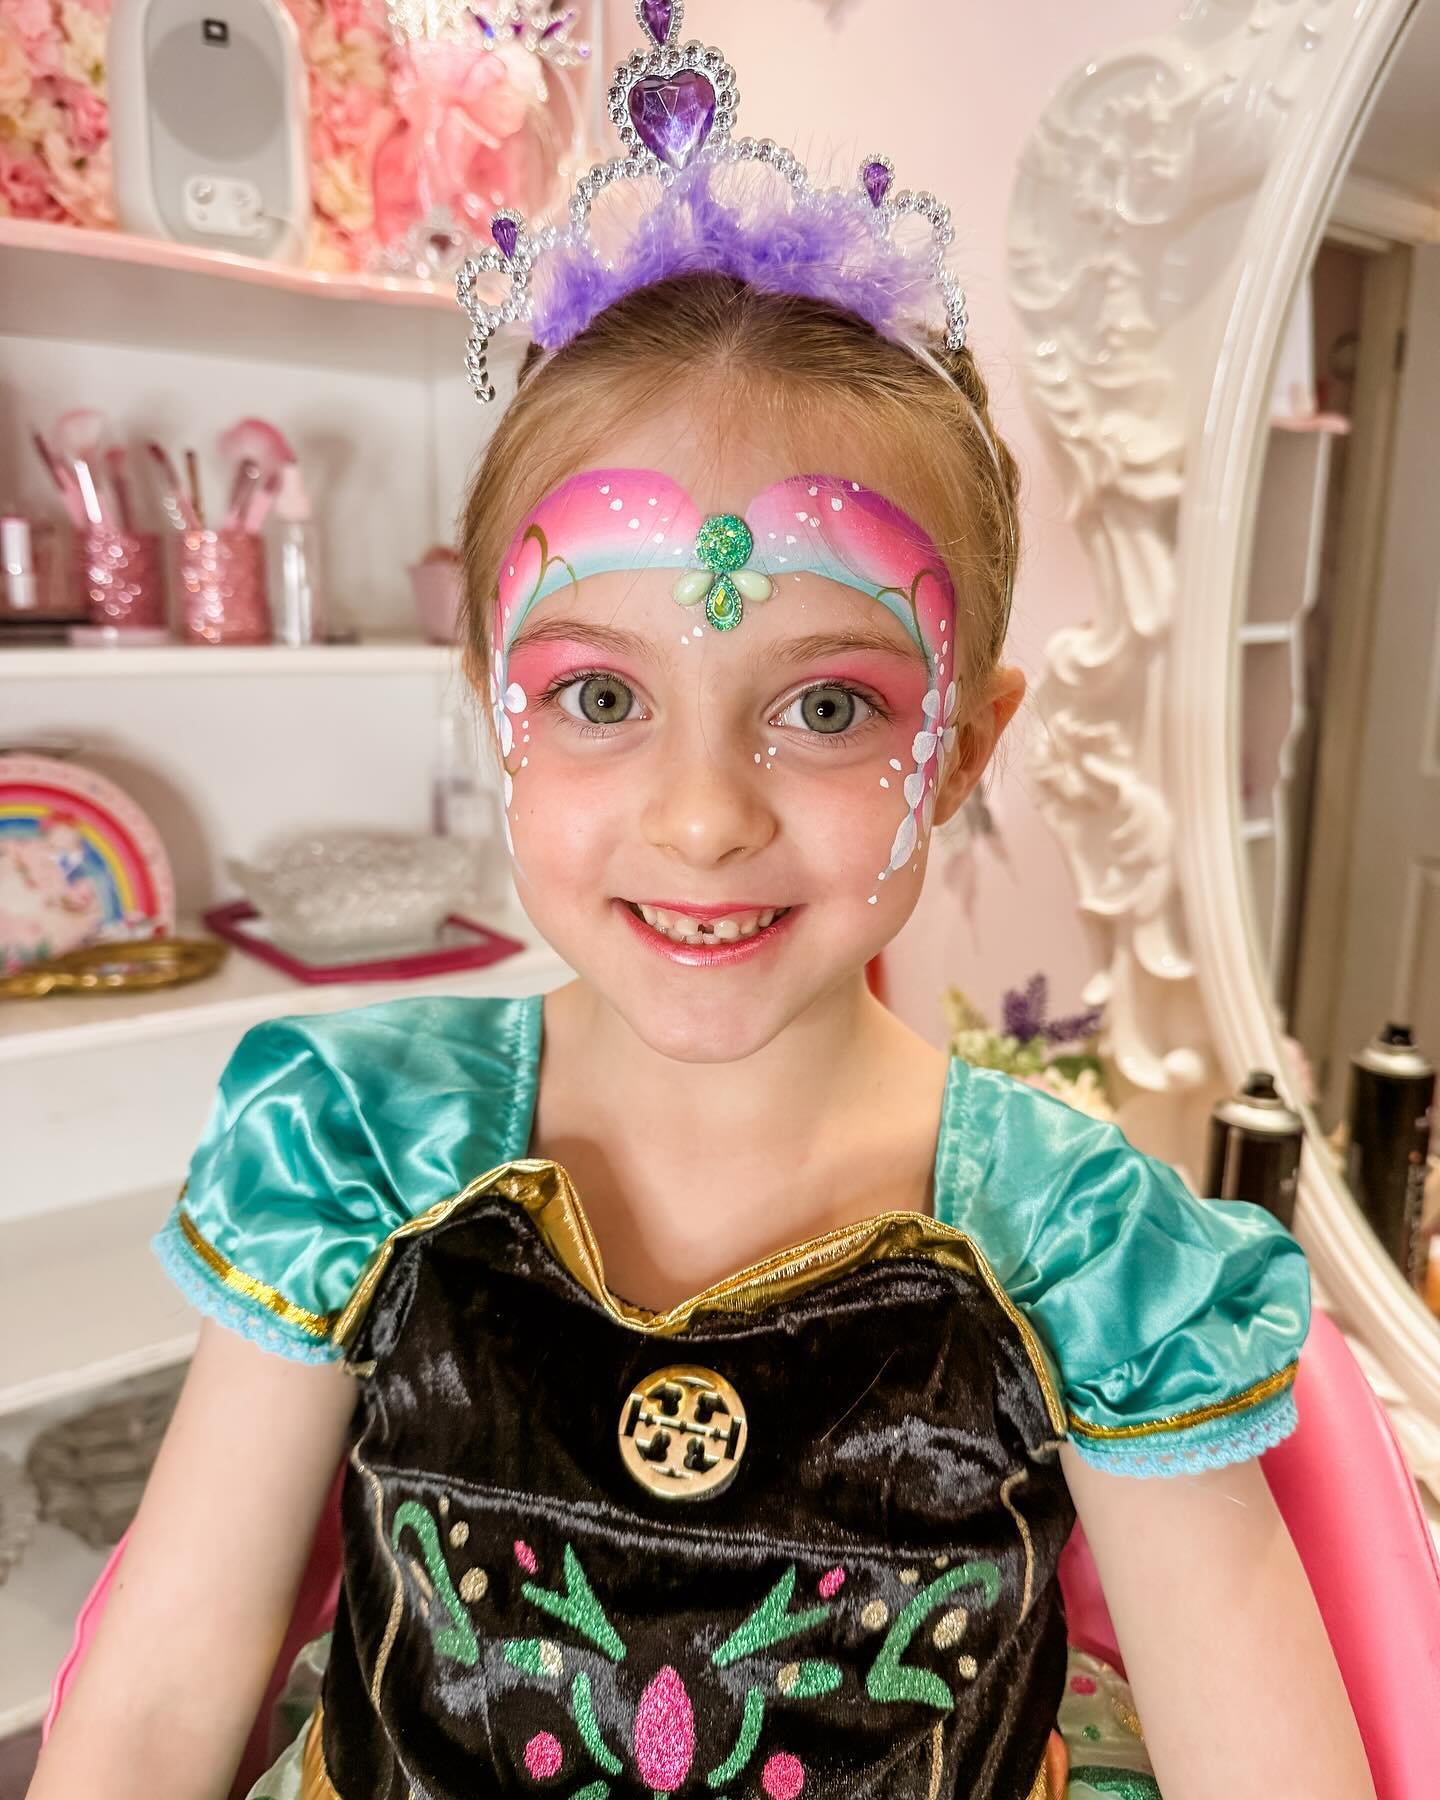 Happy birthday to this little princess who visited us yesterday for an individual princess makeover. This includes hair styling with a tiara, manicure, glitter tattoo and face painting or makeup 👑

https://www.thefairystale.co.uk/magical-makeovers-m